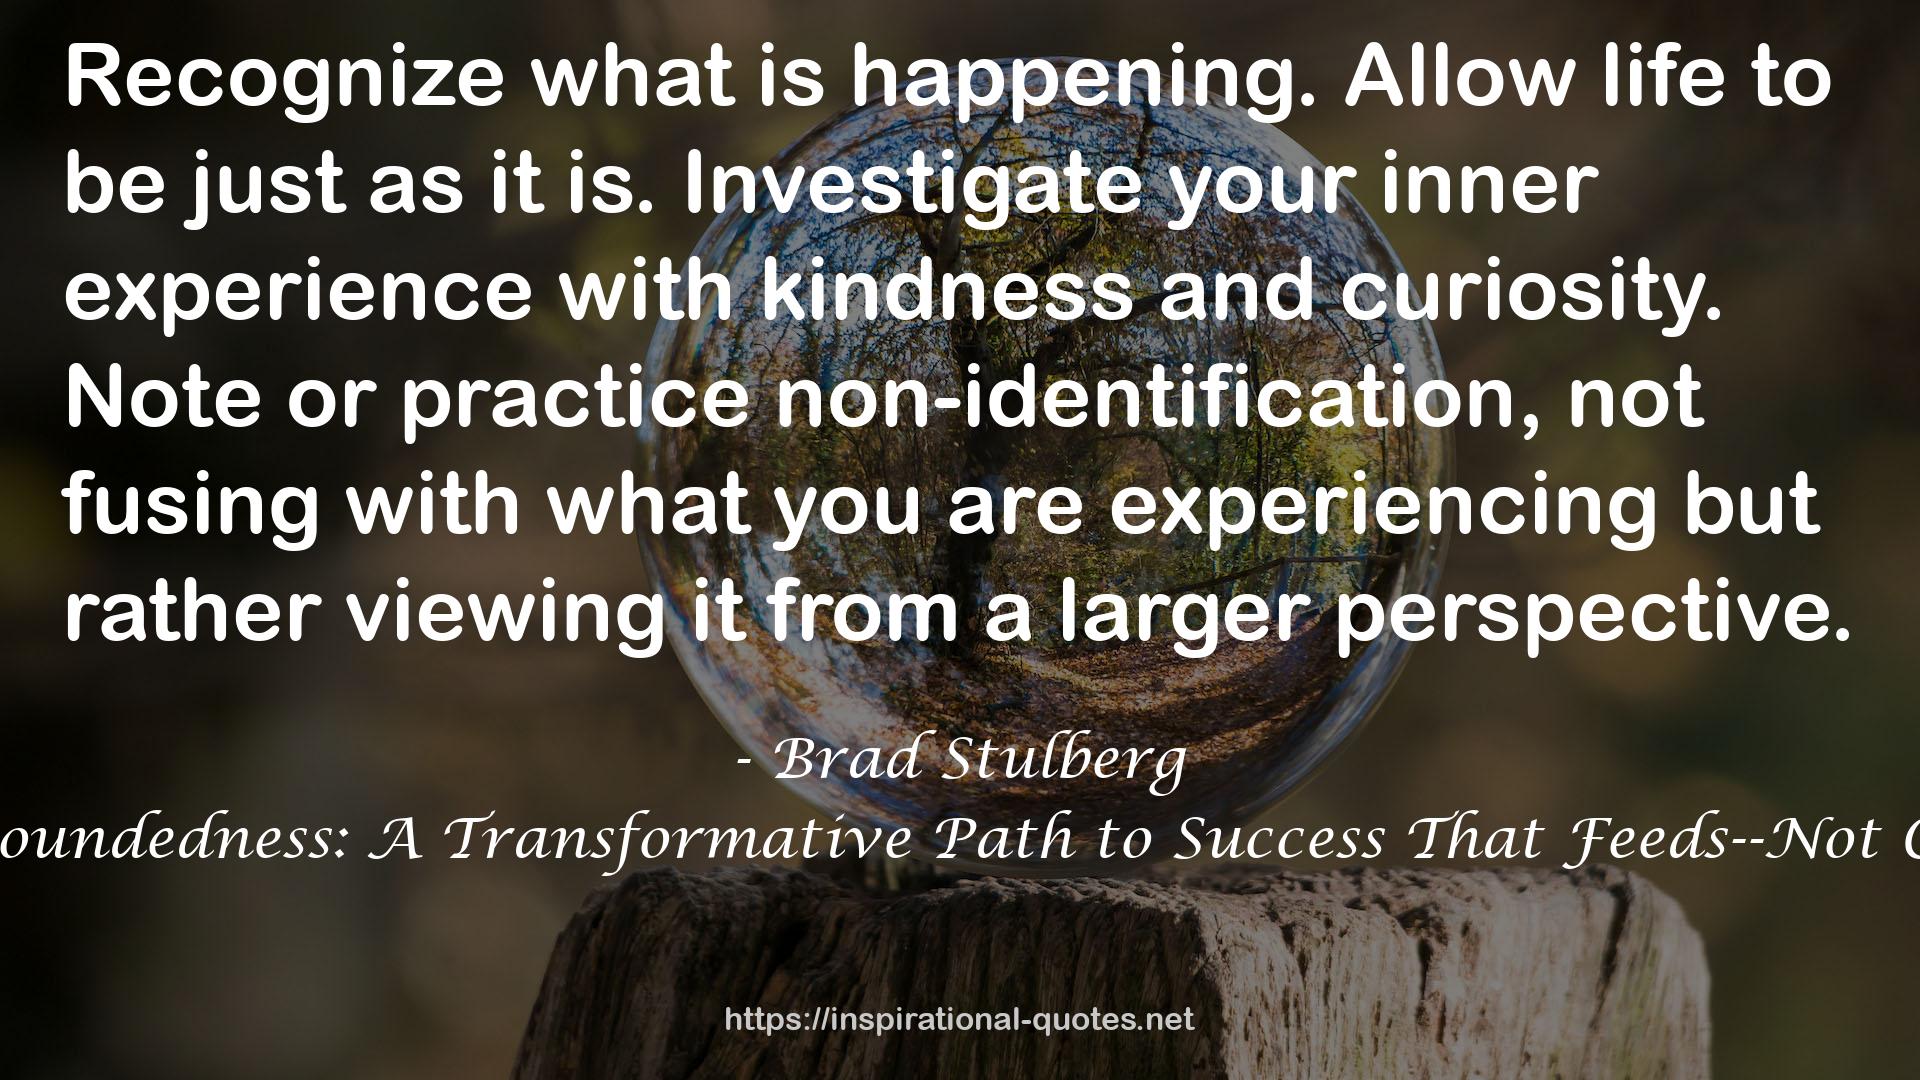 The Practice of Groundedness: A Transformative Path to Success That Feeds--Not Crushes--Your Soul QUOTES